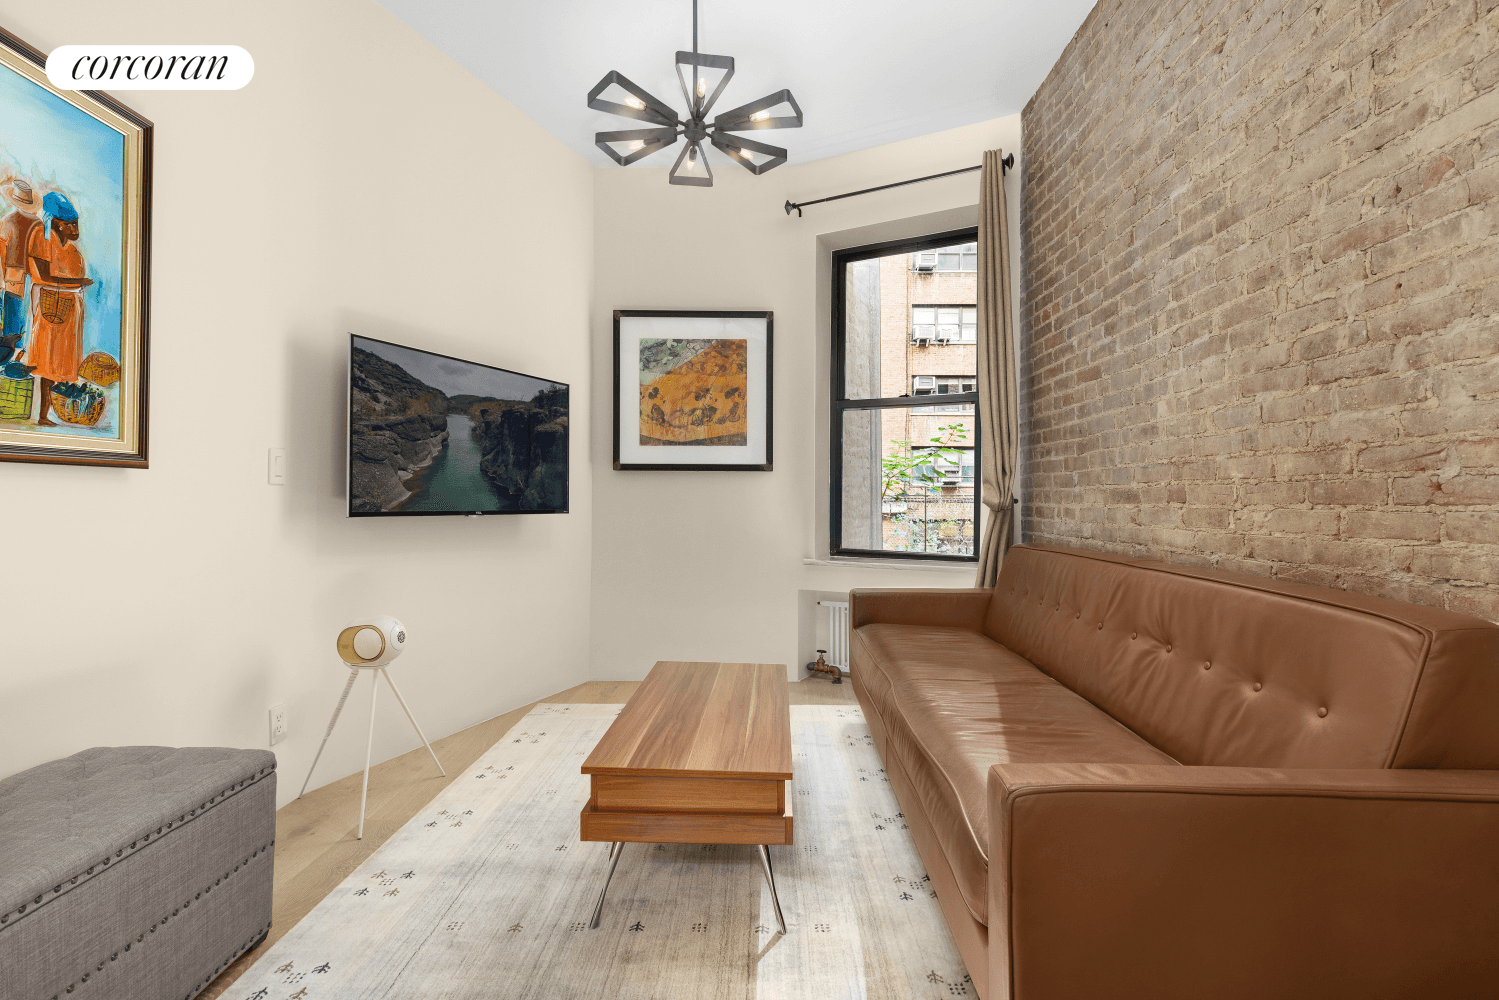 20 East 88th Street 1D is a quiet and efficiently laid out studio apartment in a boutique elevator coop on the doorstep of Central Park !